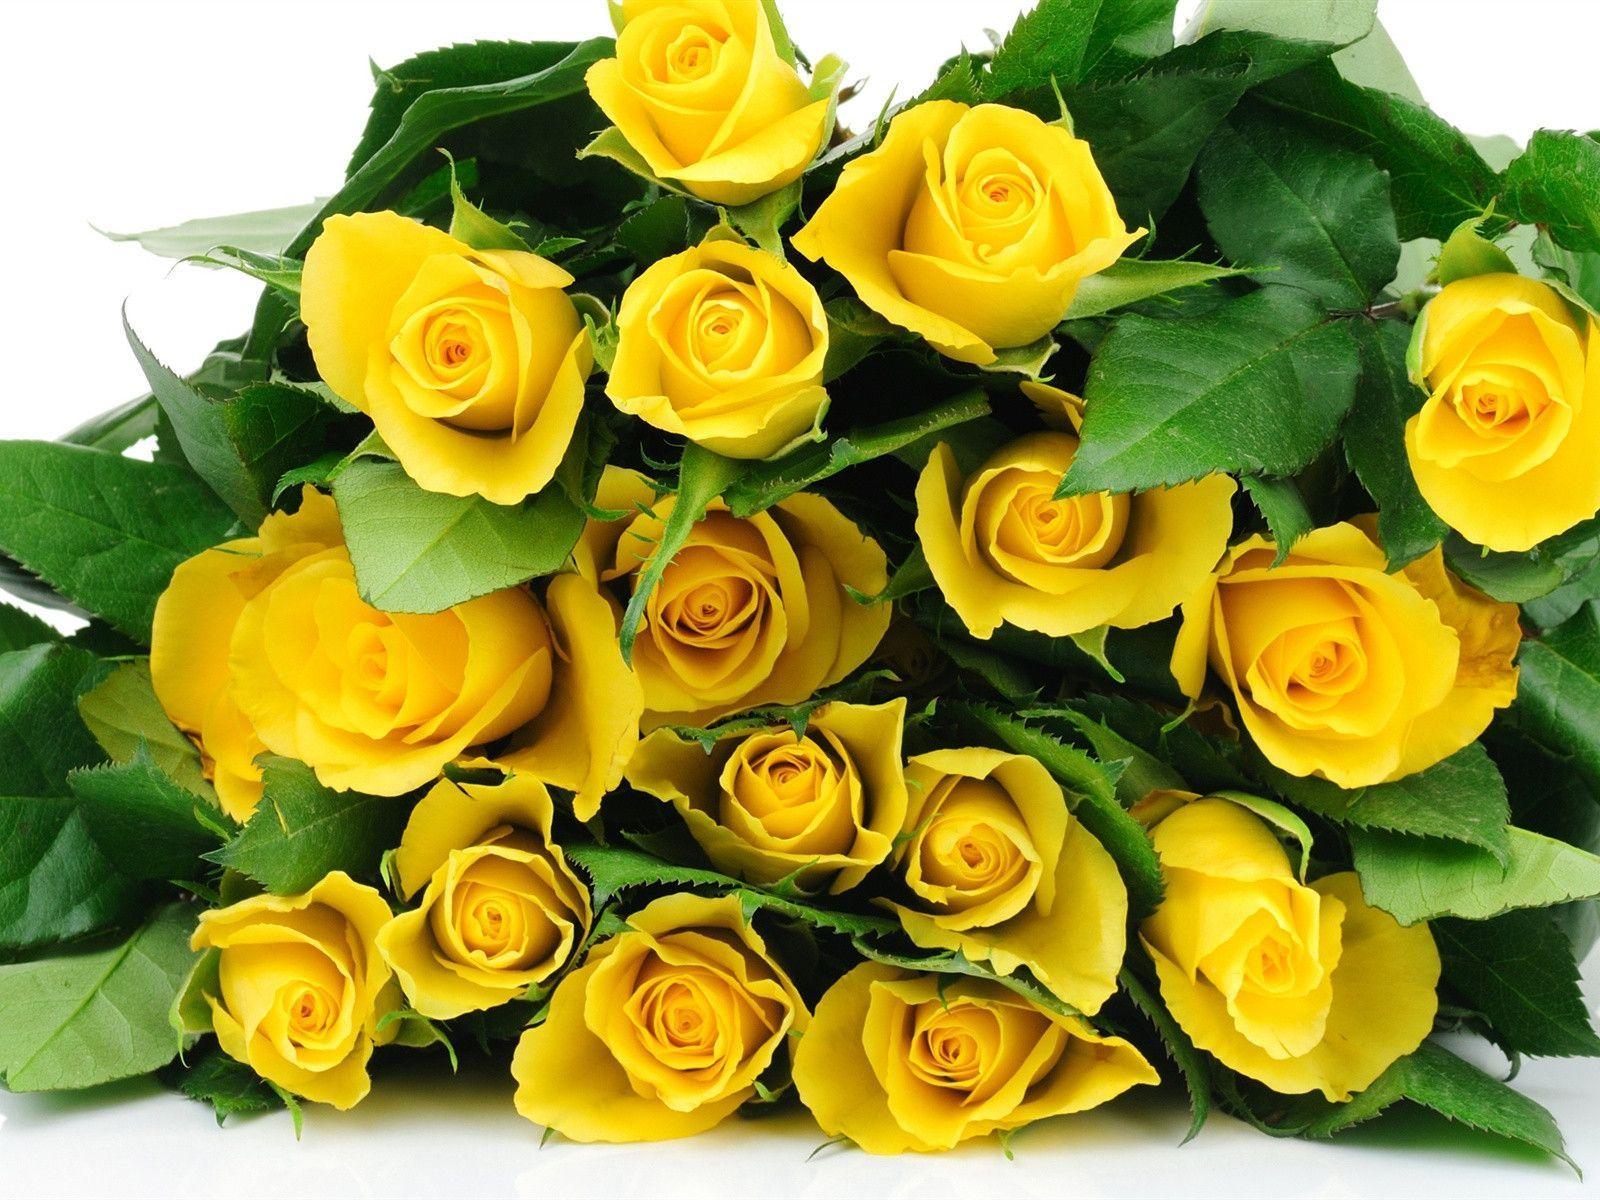 Yellow Rose Flower Wallpapers - Wallpaper Cave
